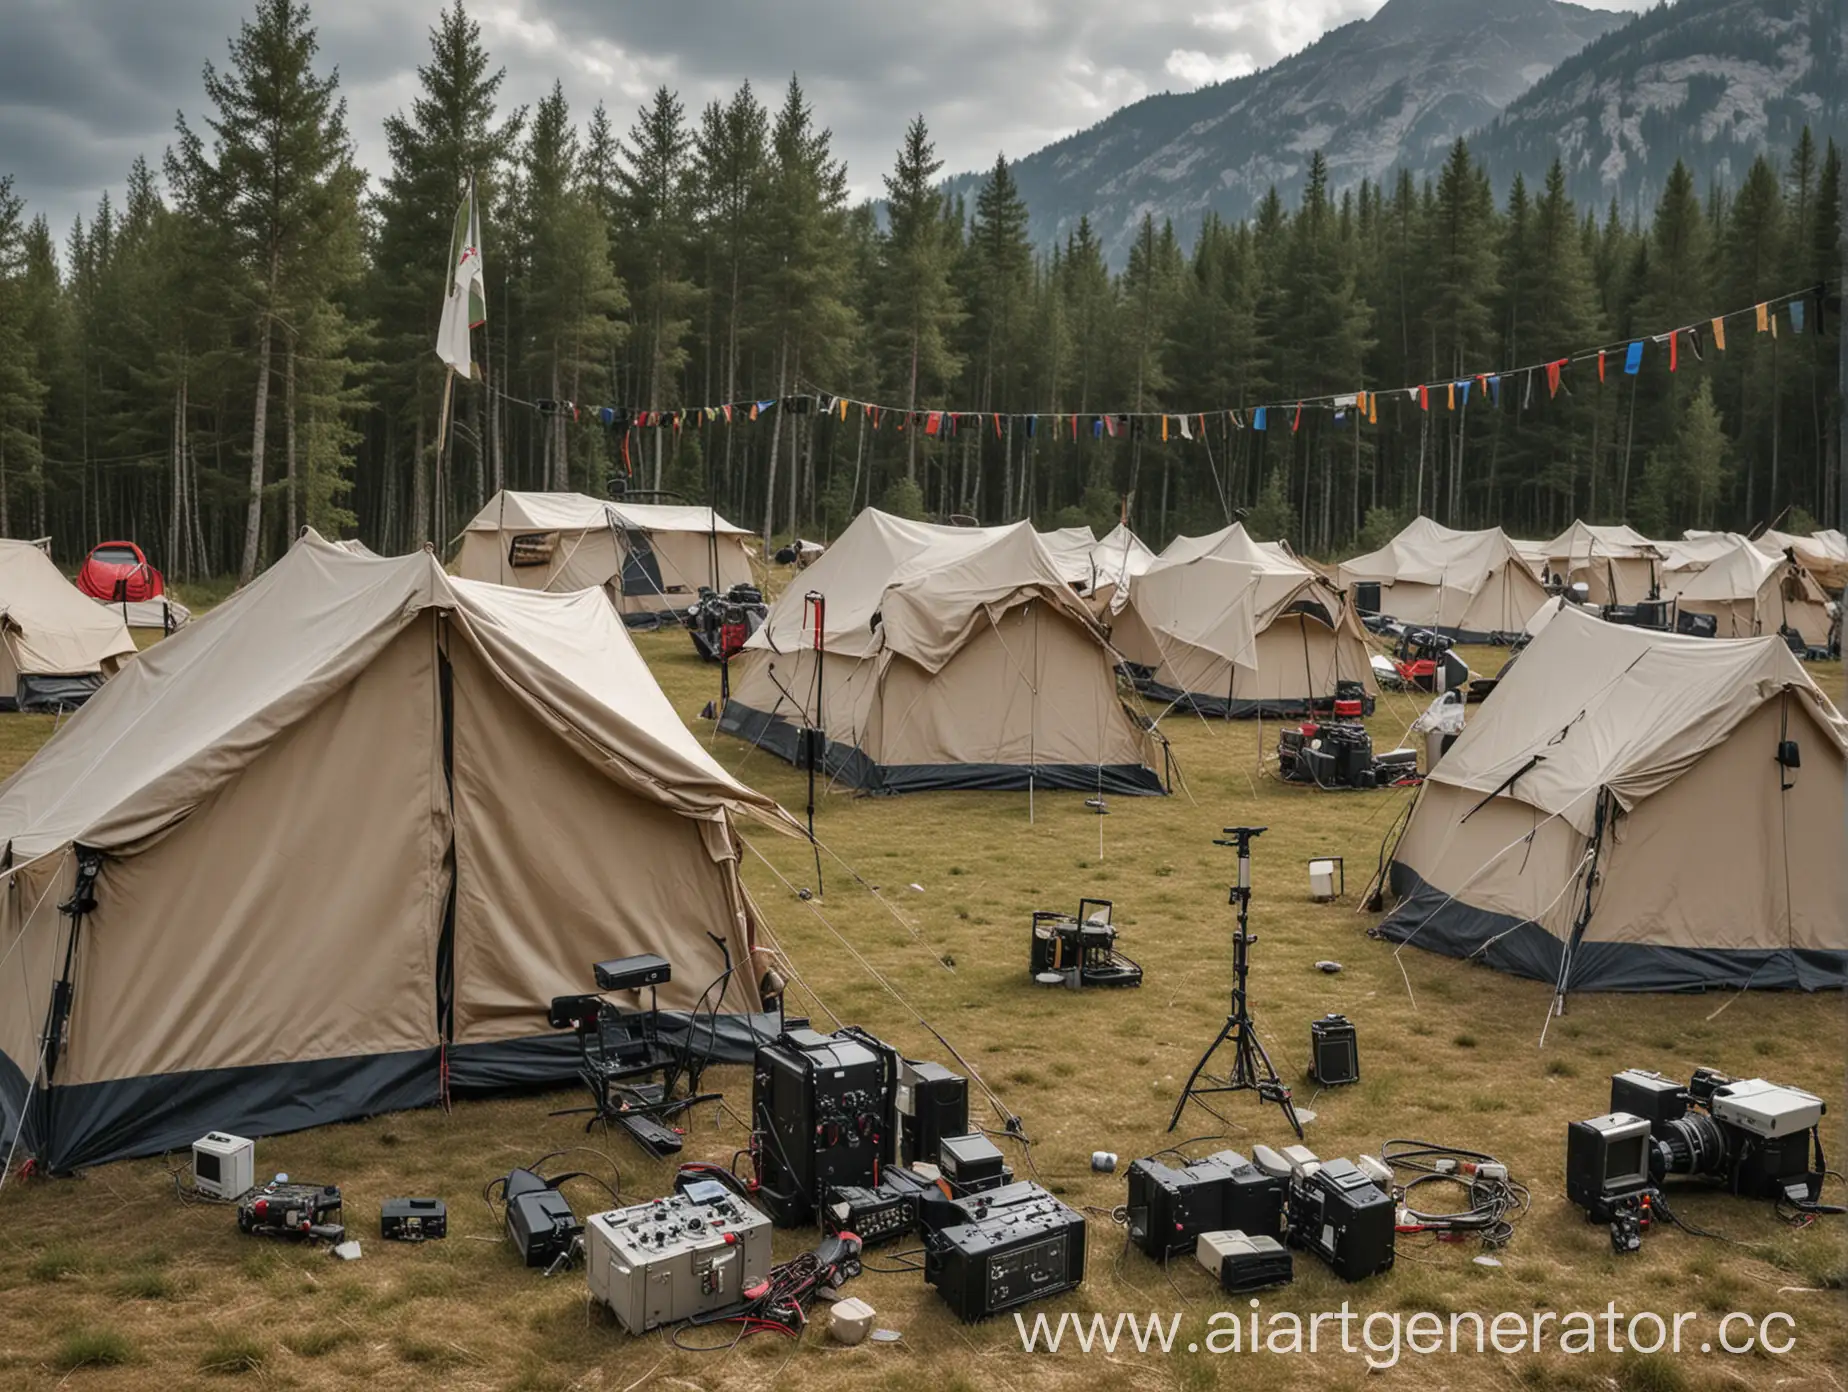 Group-with-Electrical-Instruments-and-Tents-in-Photo-Shoot-Setup